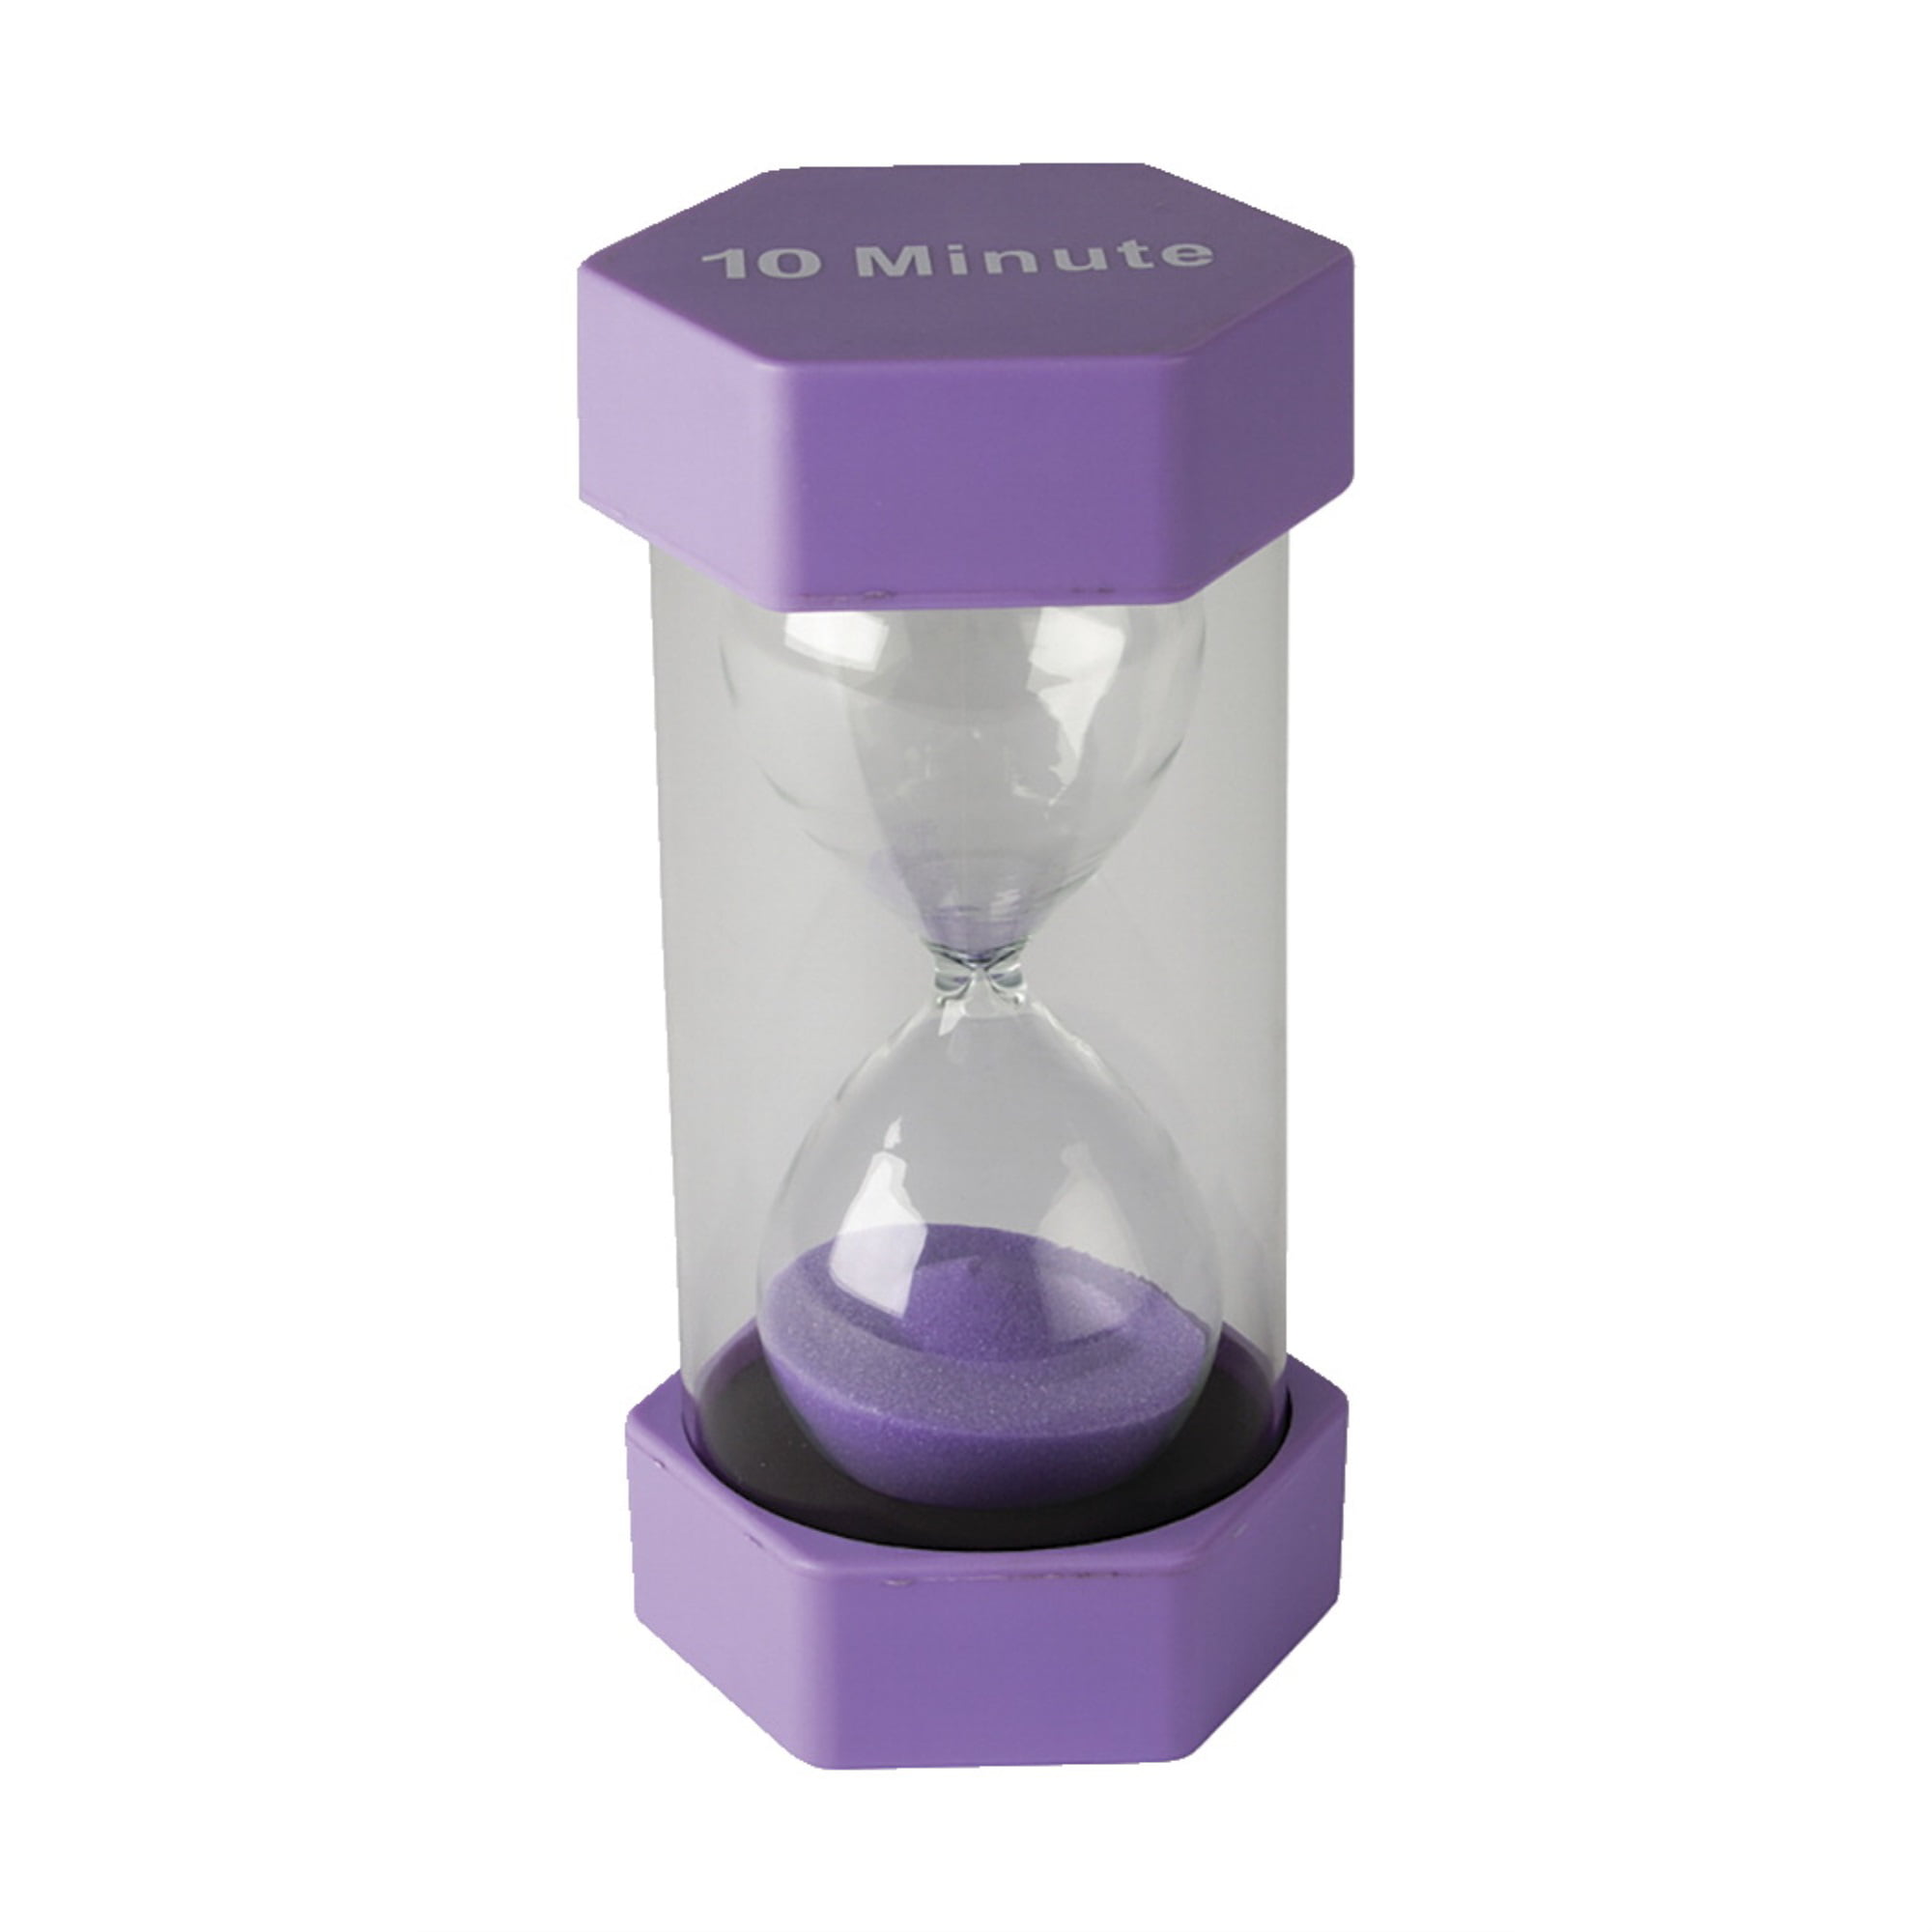 5 Minutes Hourglass Sand Glass Sand Timer for Tea Coffee/ Cooking Purple 